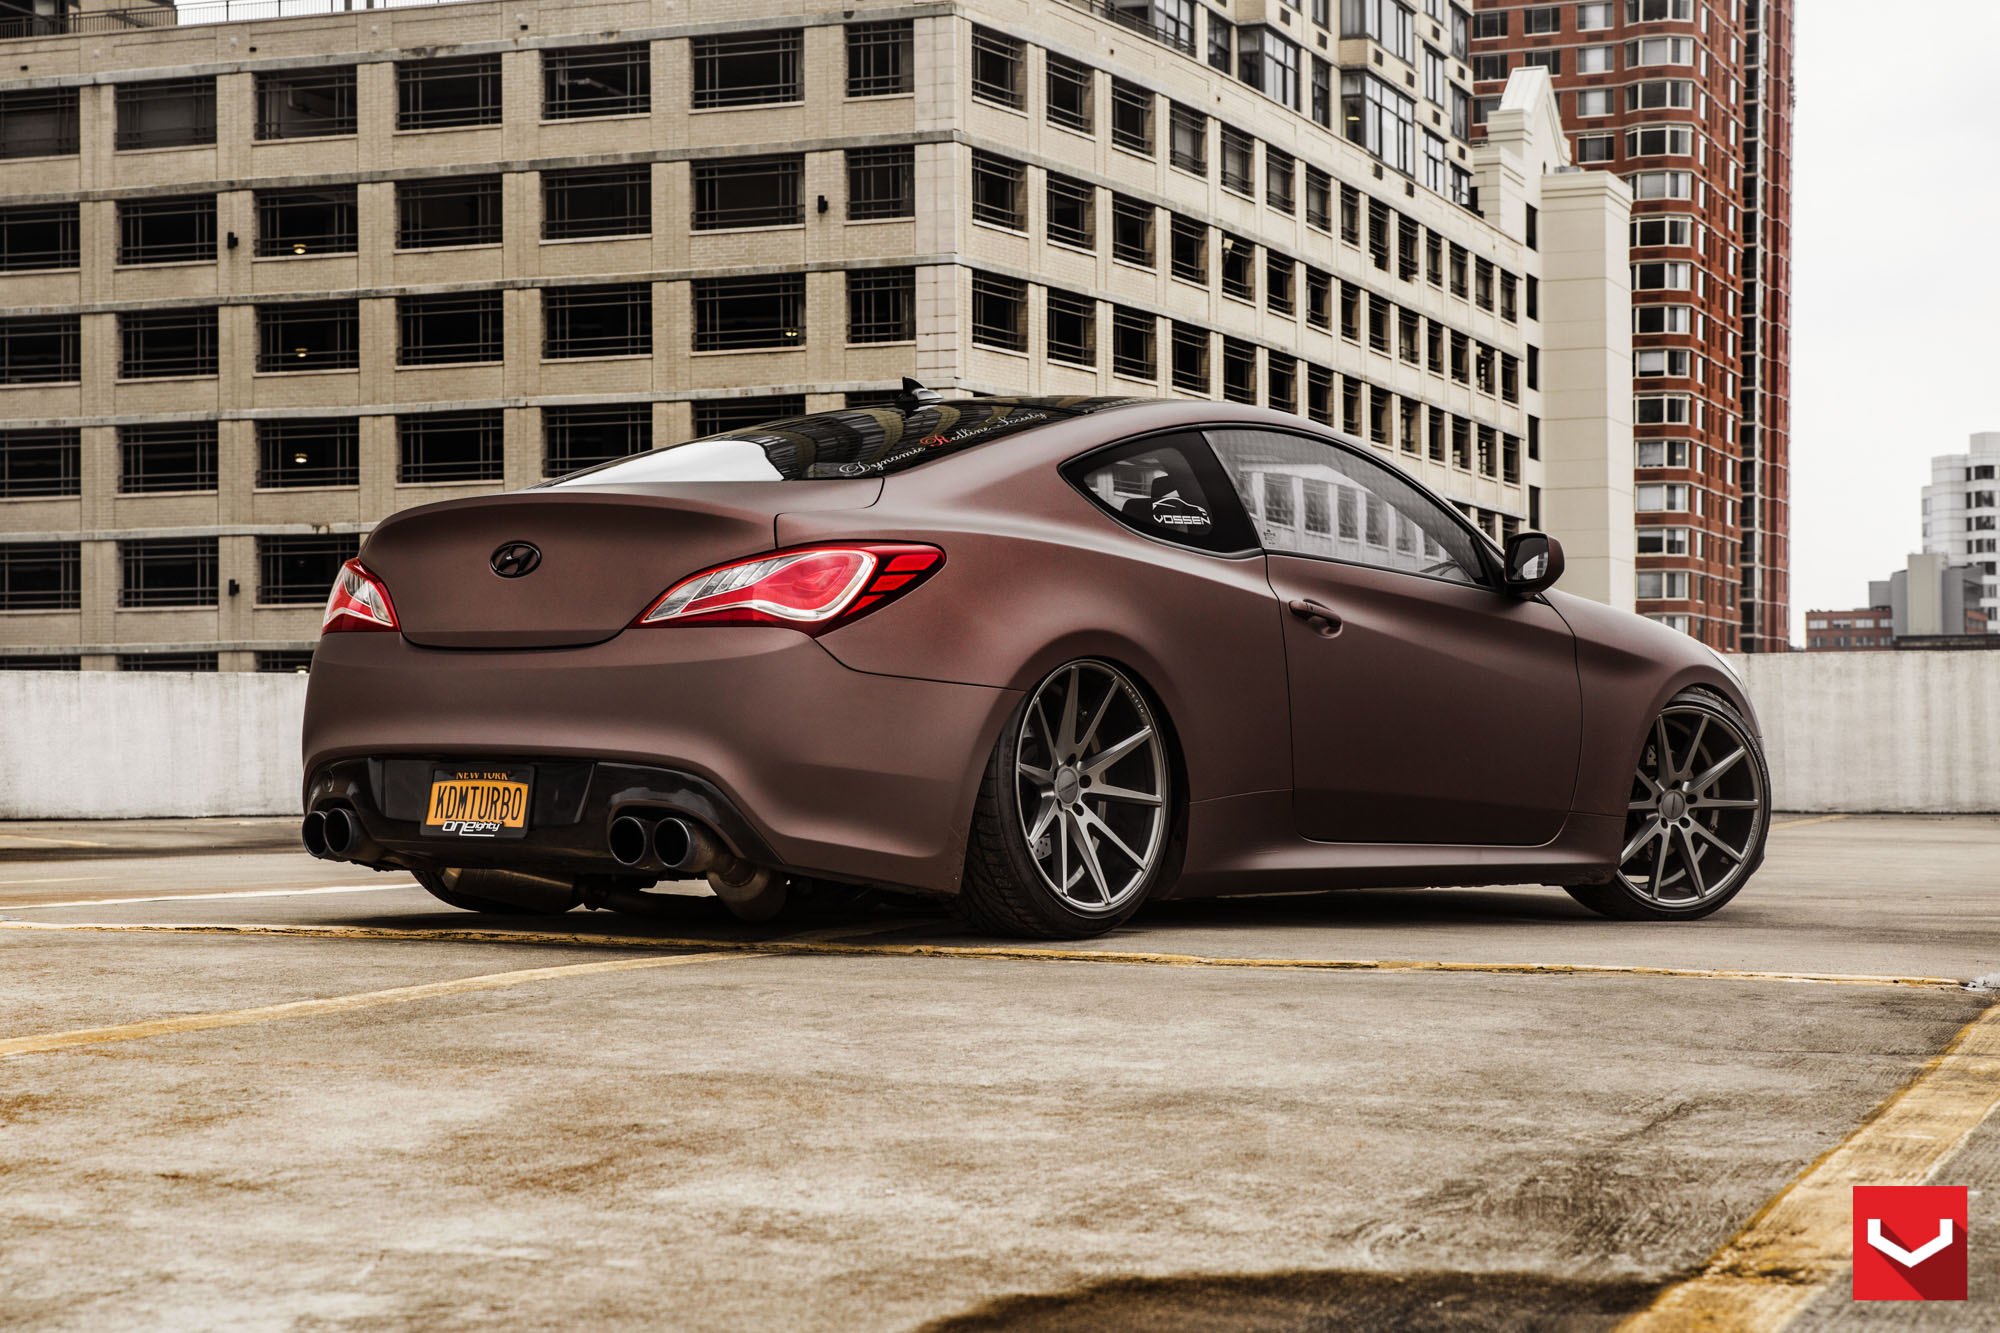 Aftermarket Rear Diffuser on Matte Hyundai Genesis Coupe - Photo by Vossen